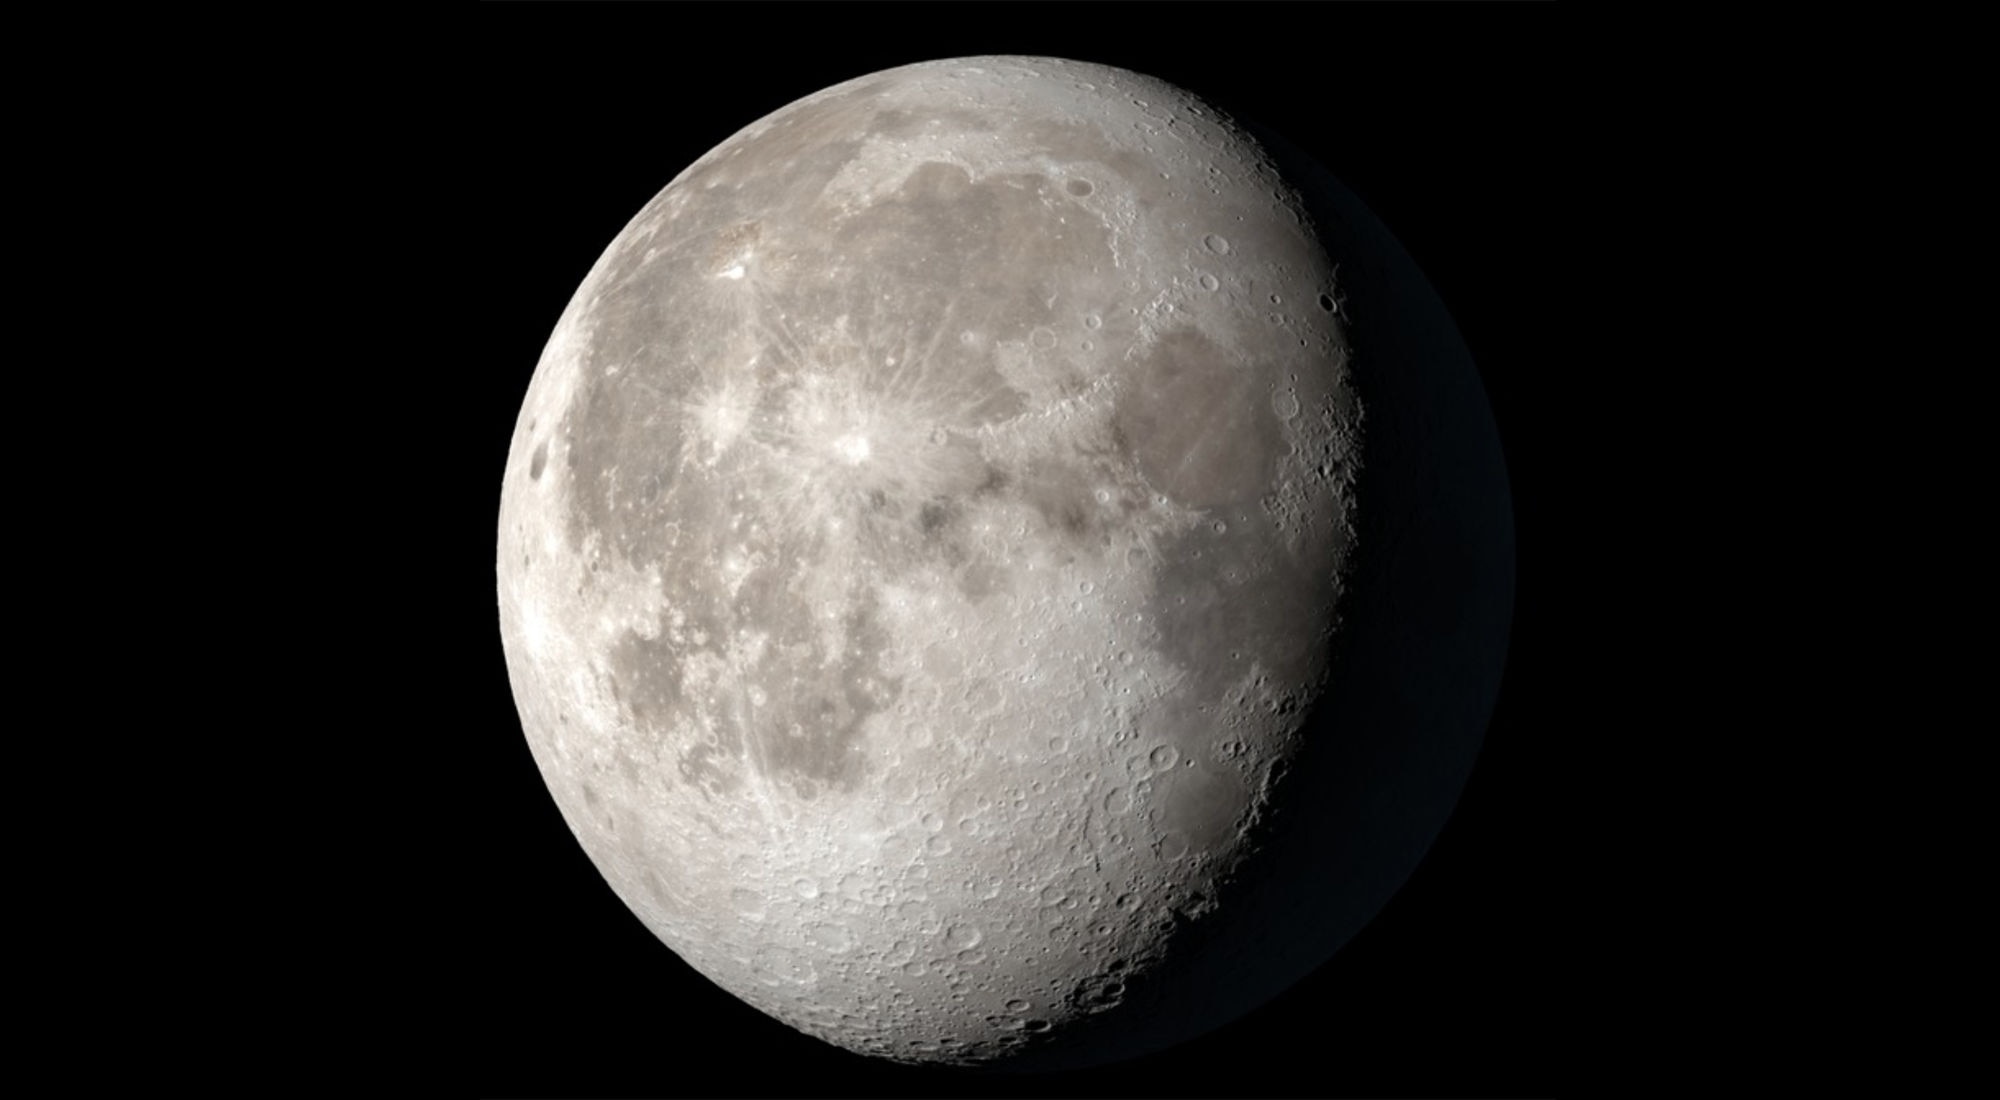 The Moon’s appearance on June 21, 2019 (the June solstice), as calculated using NASA’s Dial-A-Moon. Credit: NASA's Scientific Visualization Studio